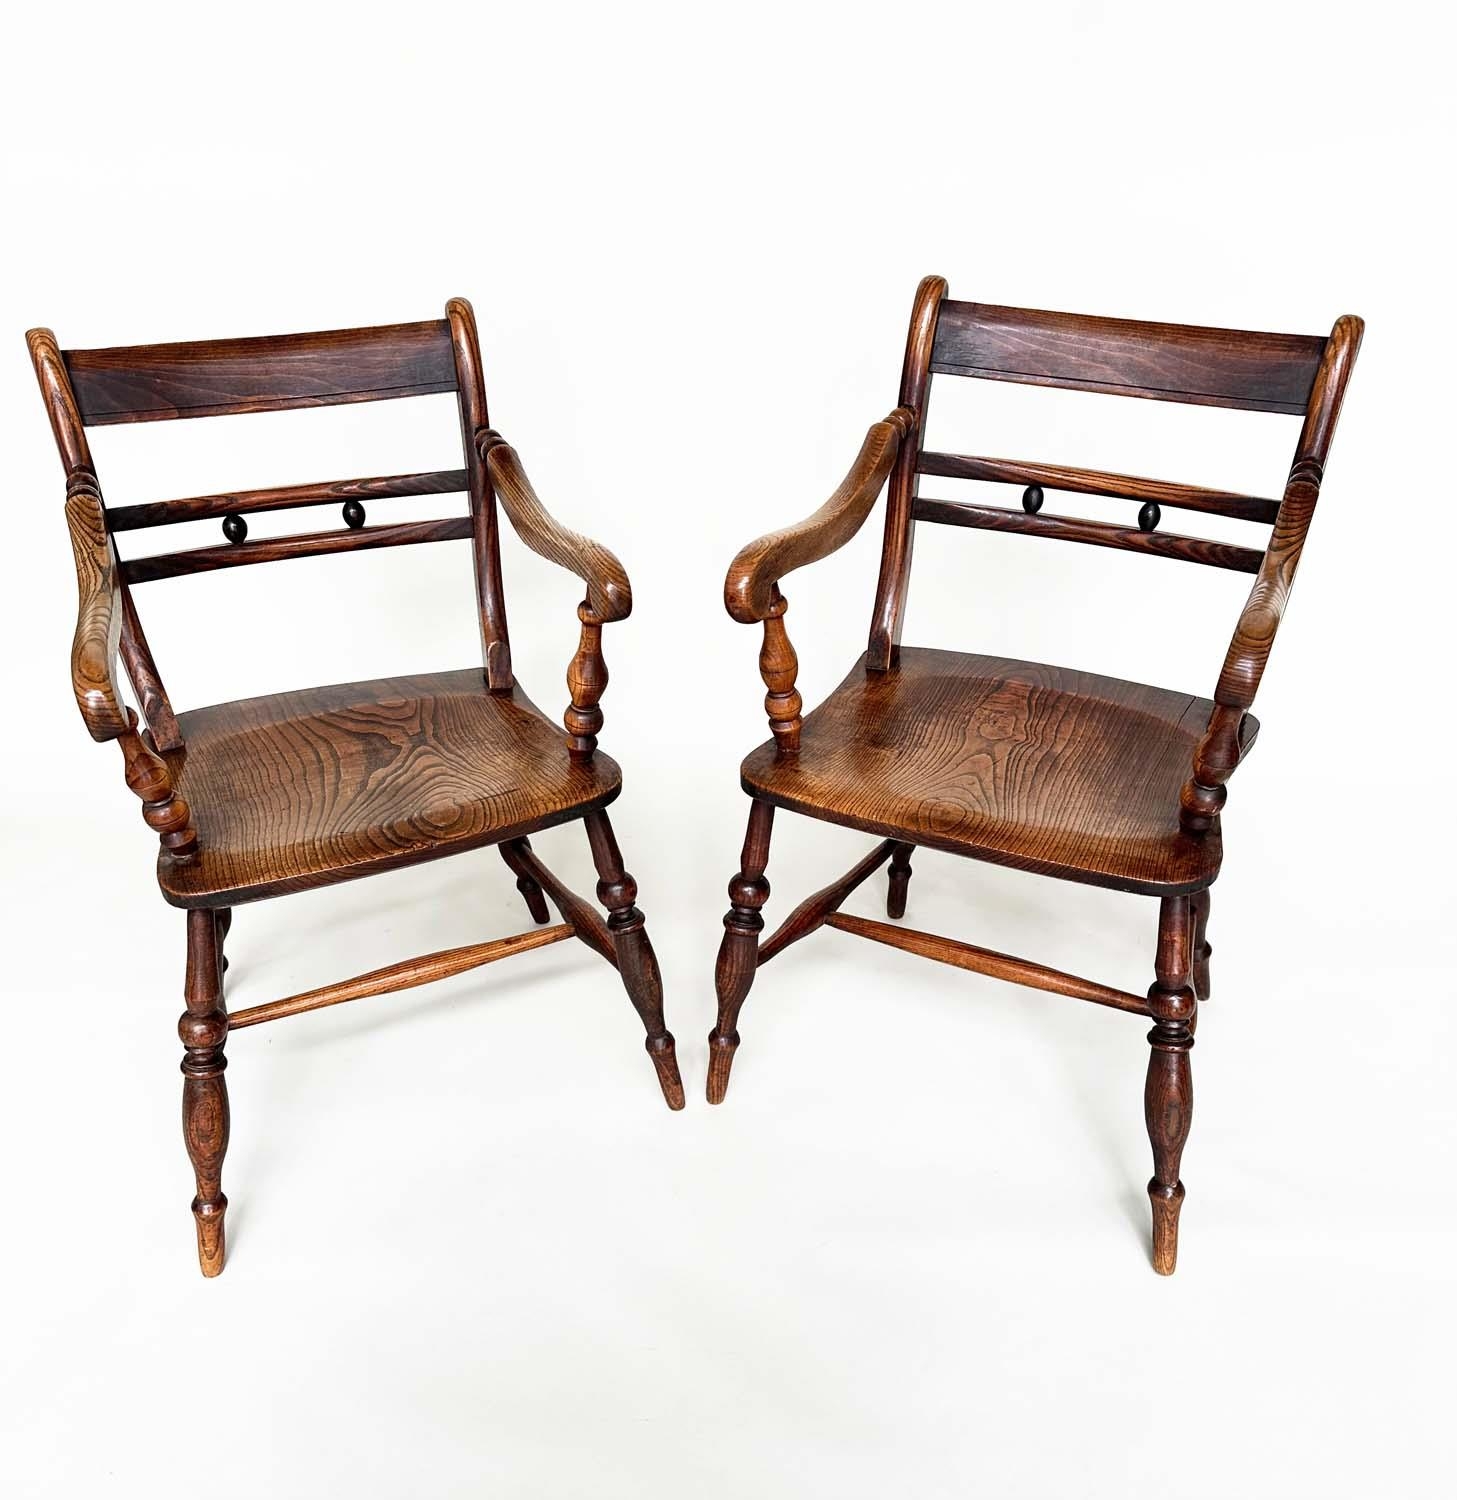 OXFORD ARMCHAIRS, a pair, 19th century English, High Wycombe, ash, elm and alder with shaped seats - Image 5 of 11